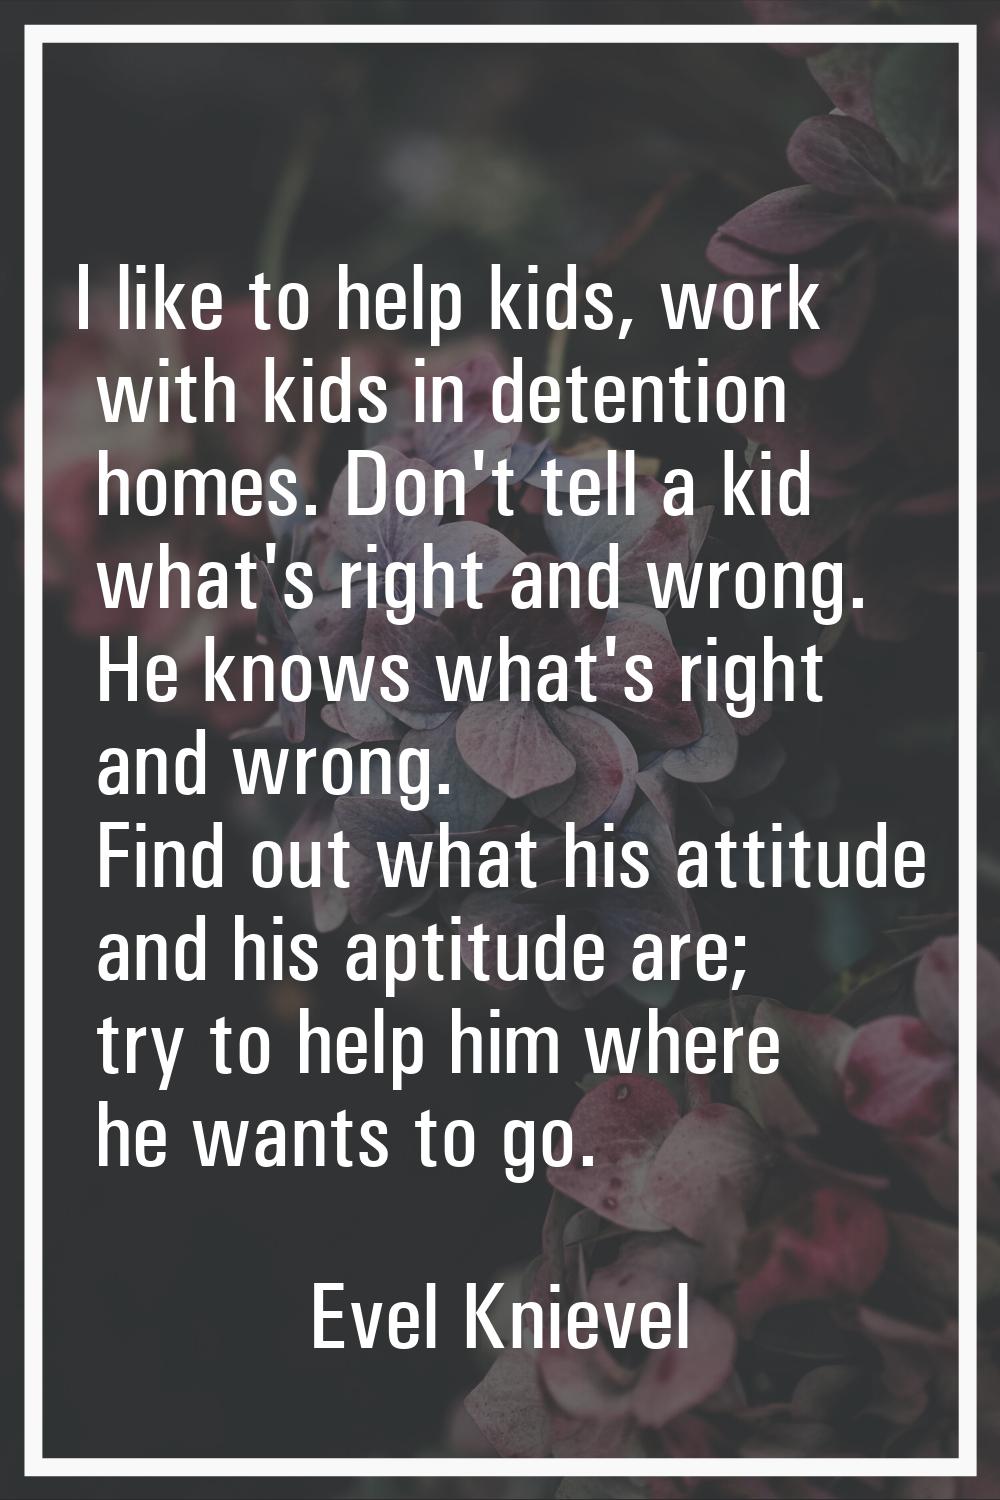 I like to help kids, work with kids in detention homes. Don't tell a kid what's right and wrong. He